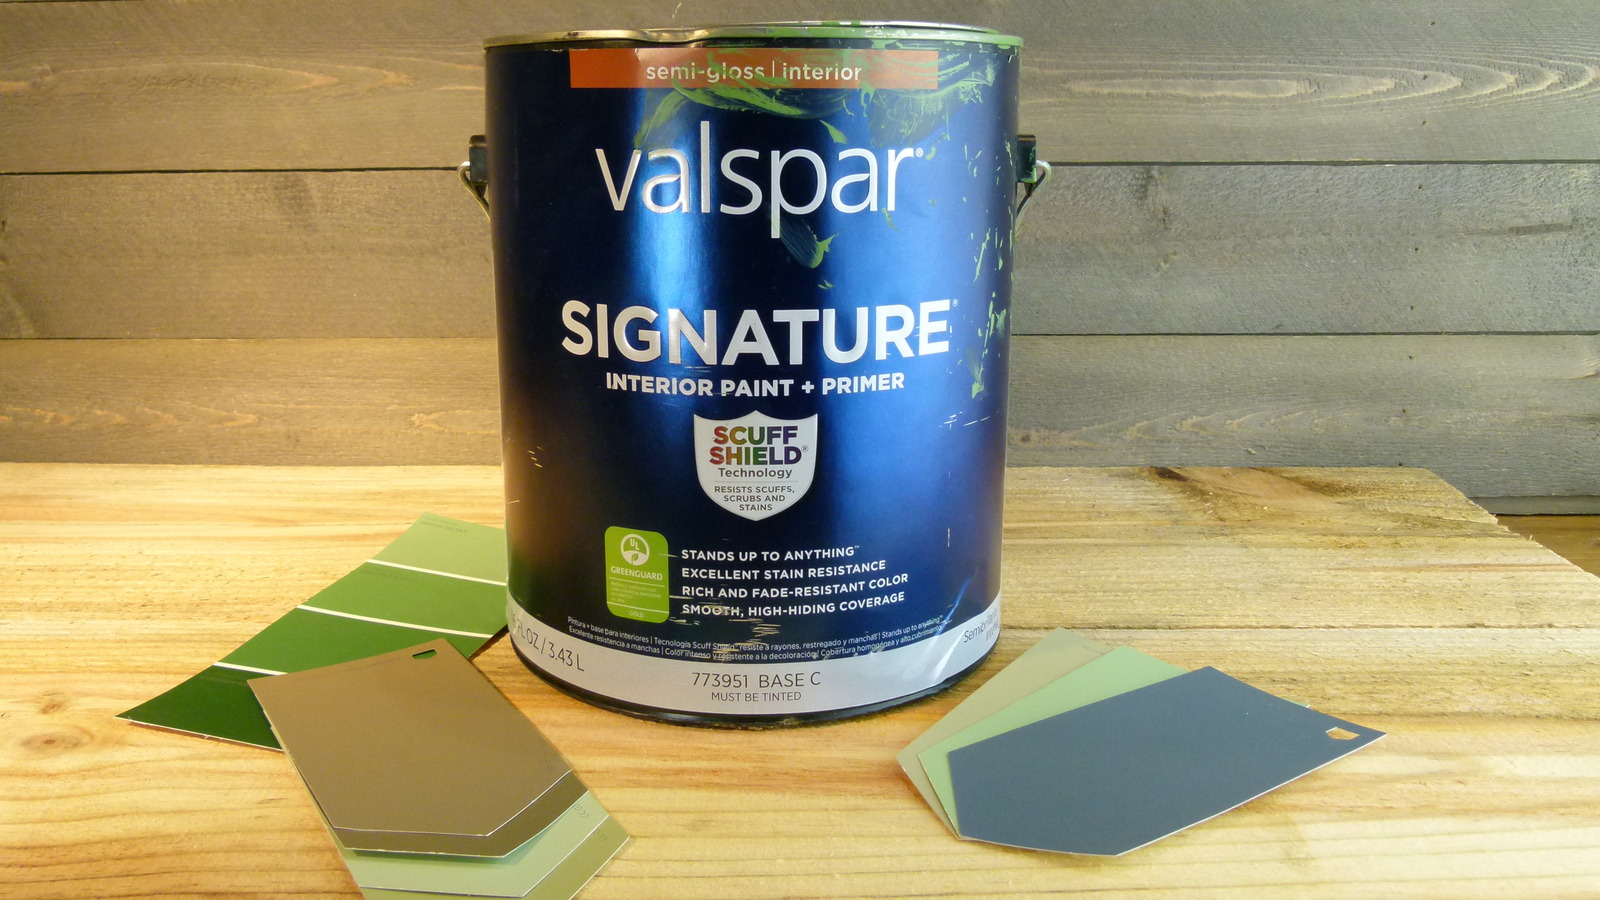 Here's what to consider before applying a semi-gloss paint to your